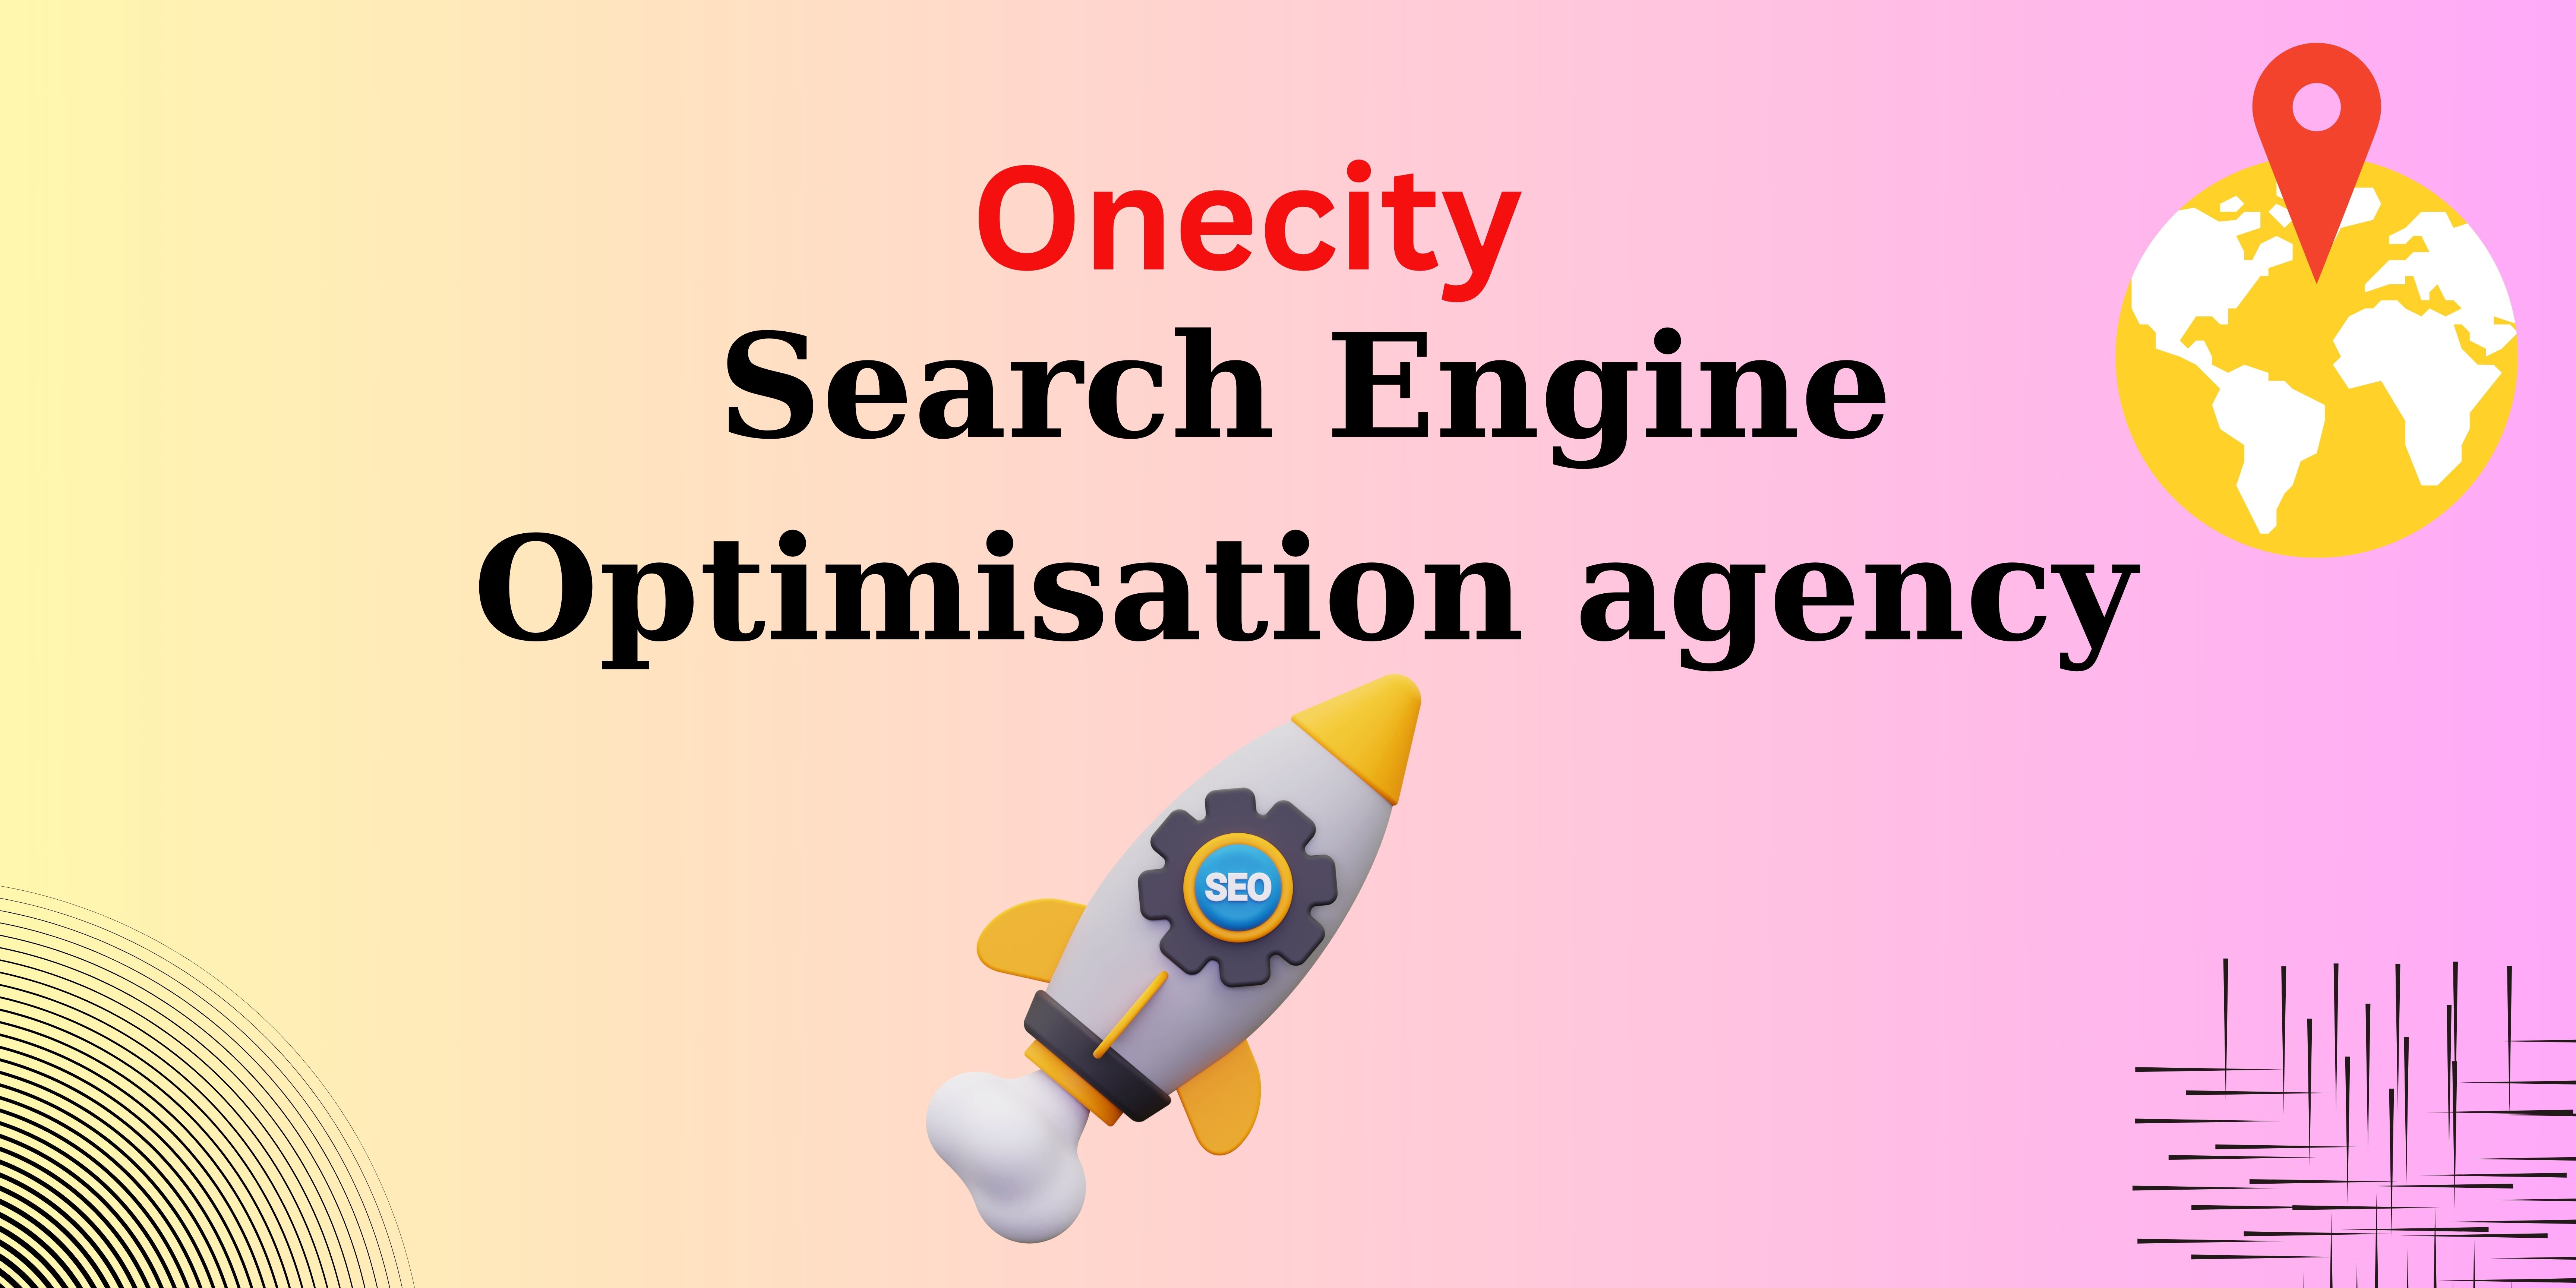 Search Engine Optimisation agency